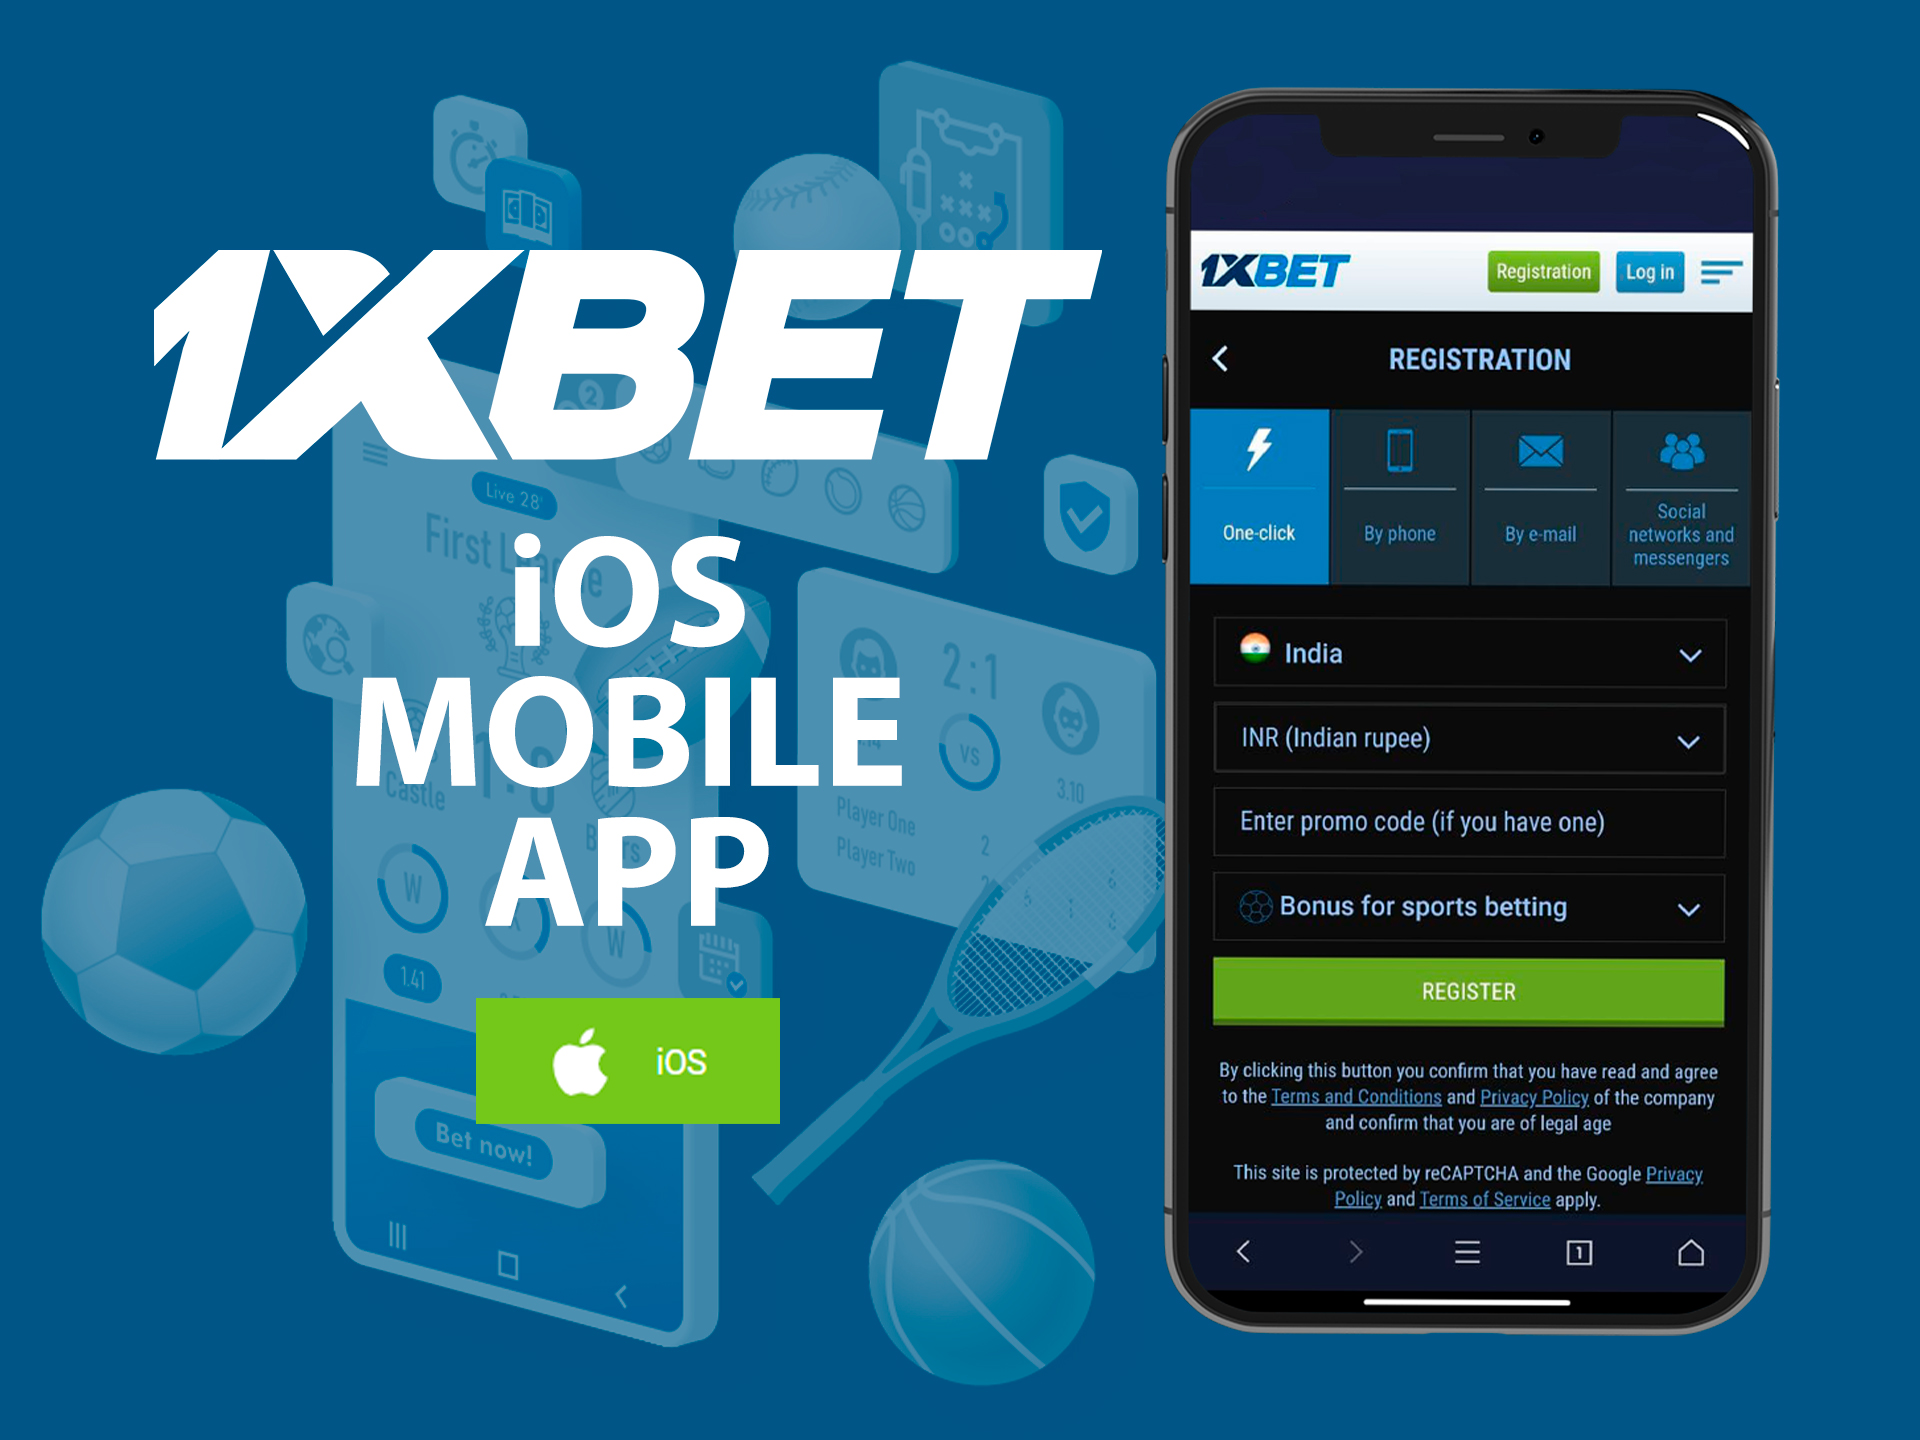 1xBet app for betting on sports on iOS devices.